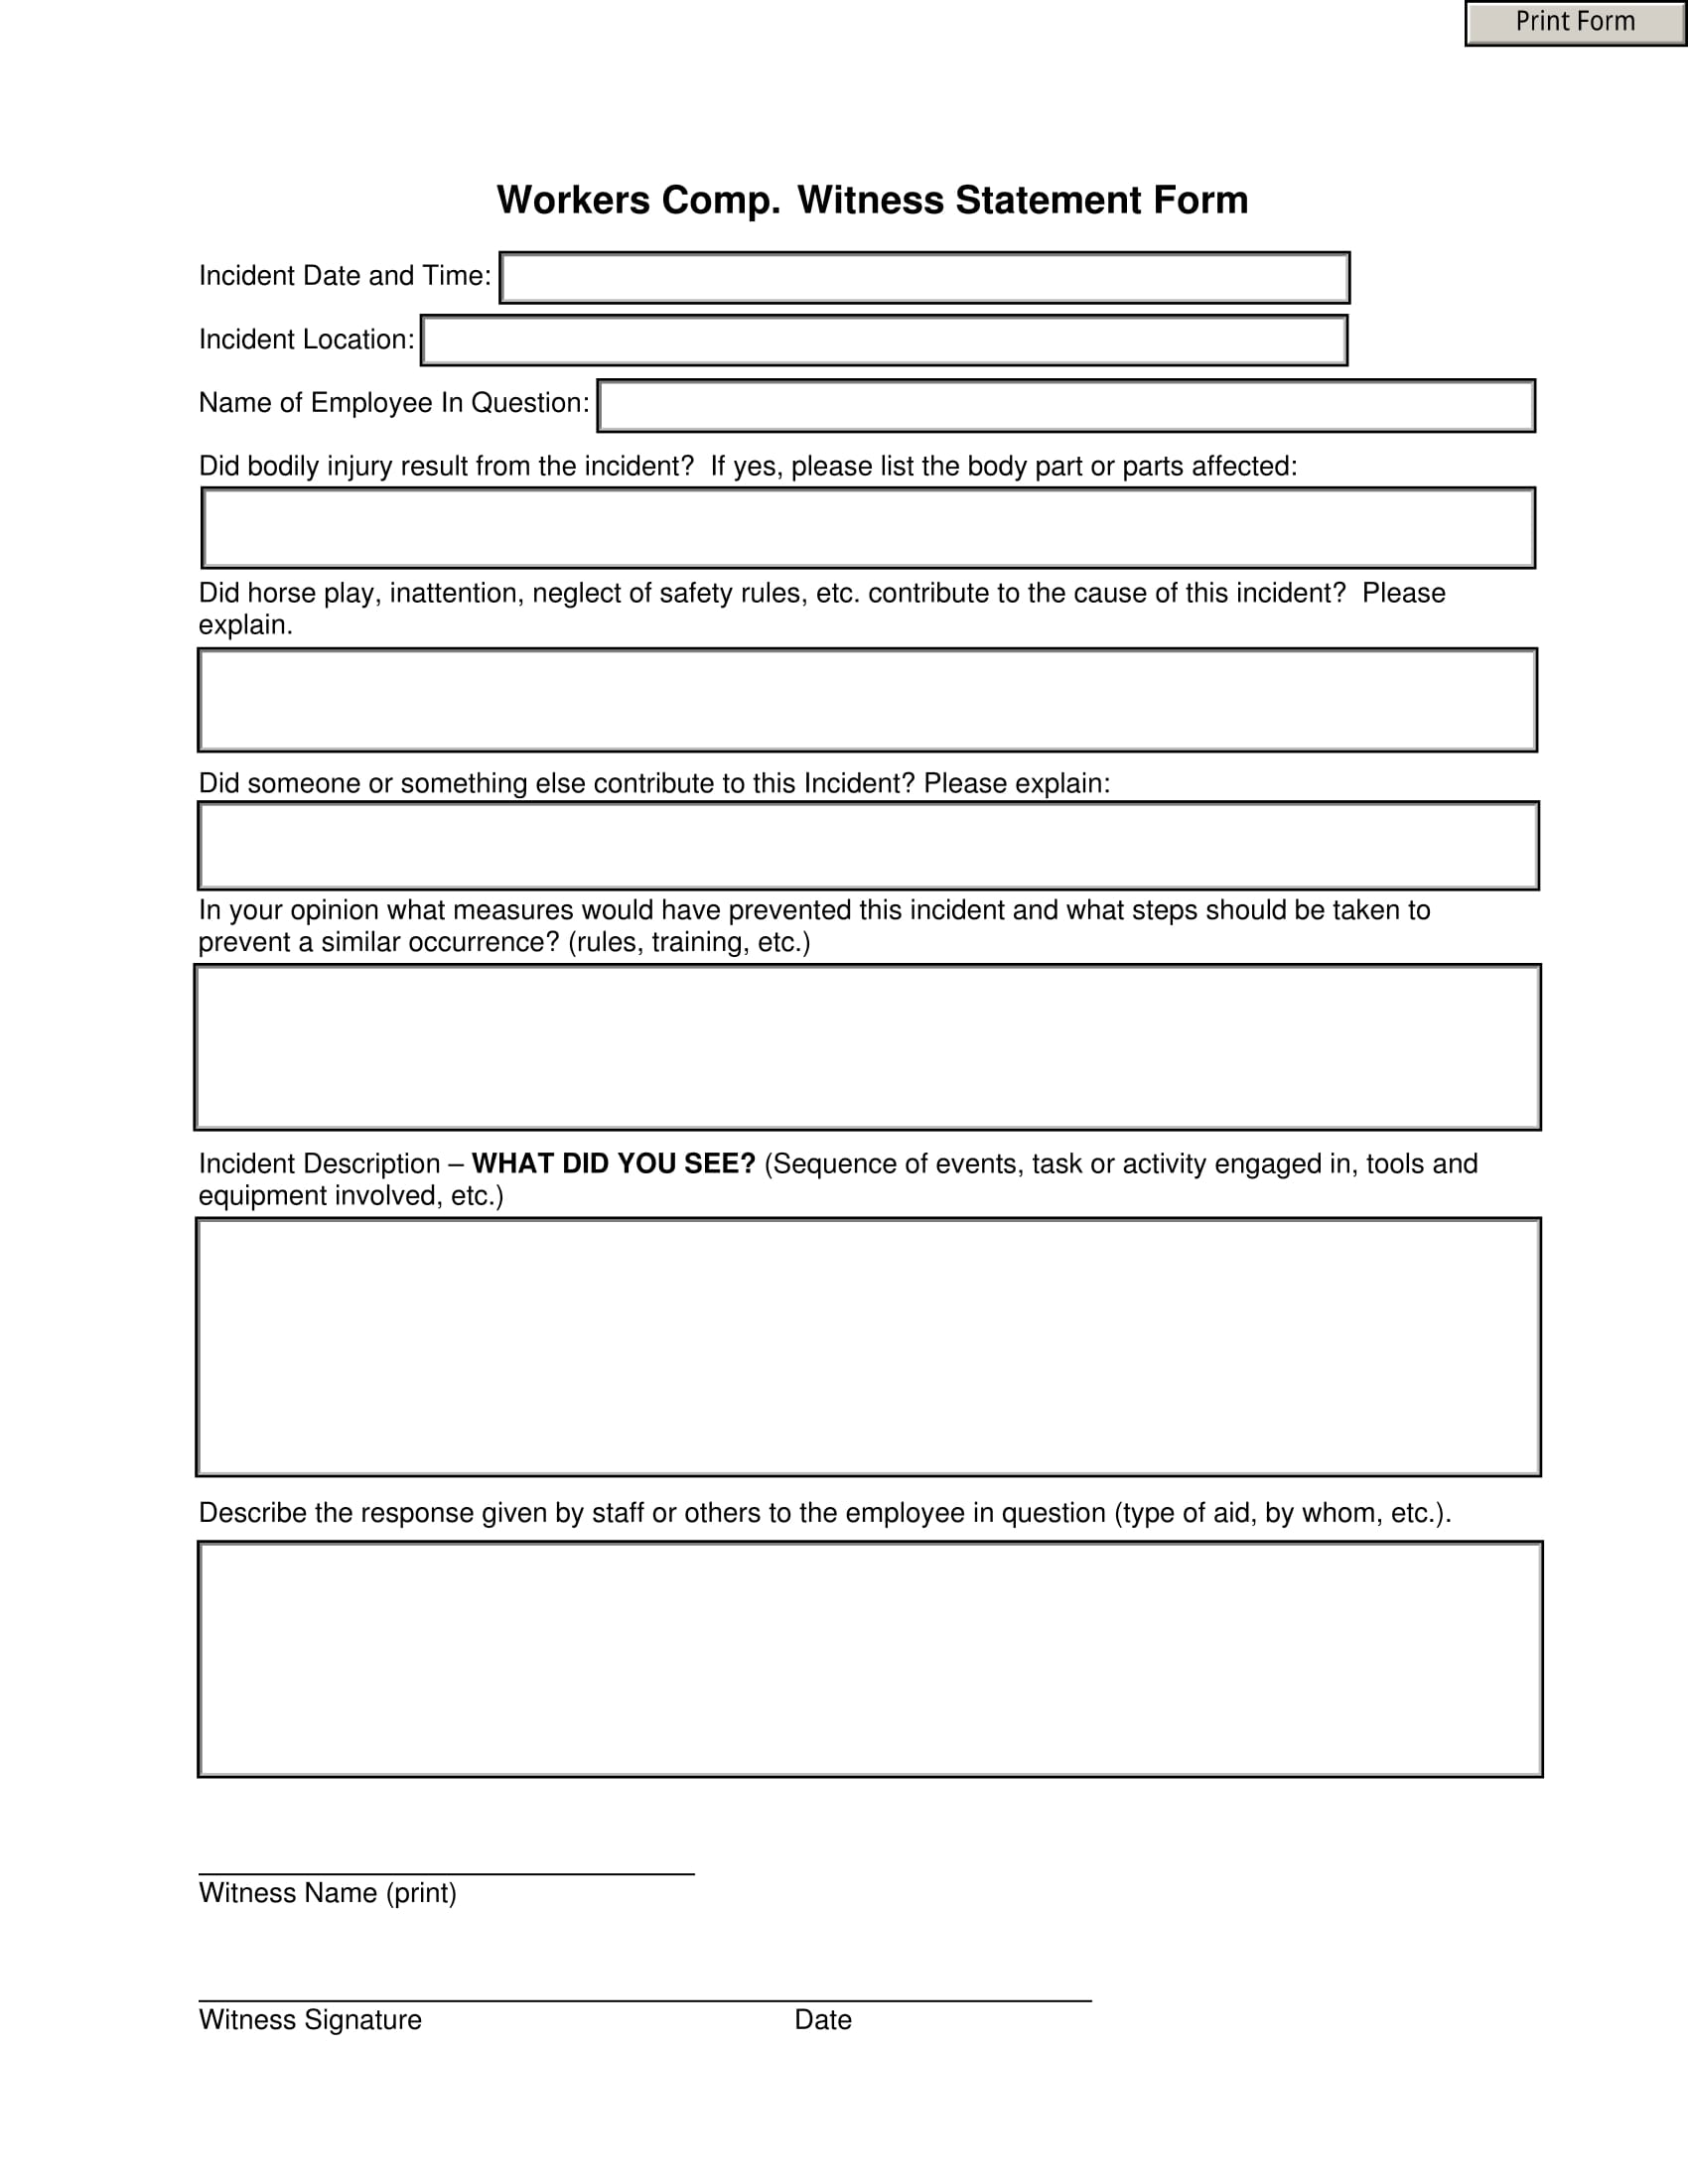 FREE 5+ Employee Witness Statement Forms in MS Word  PDF